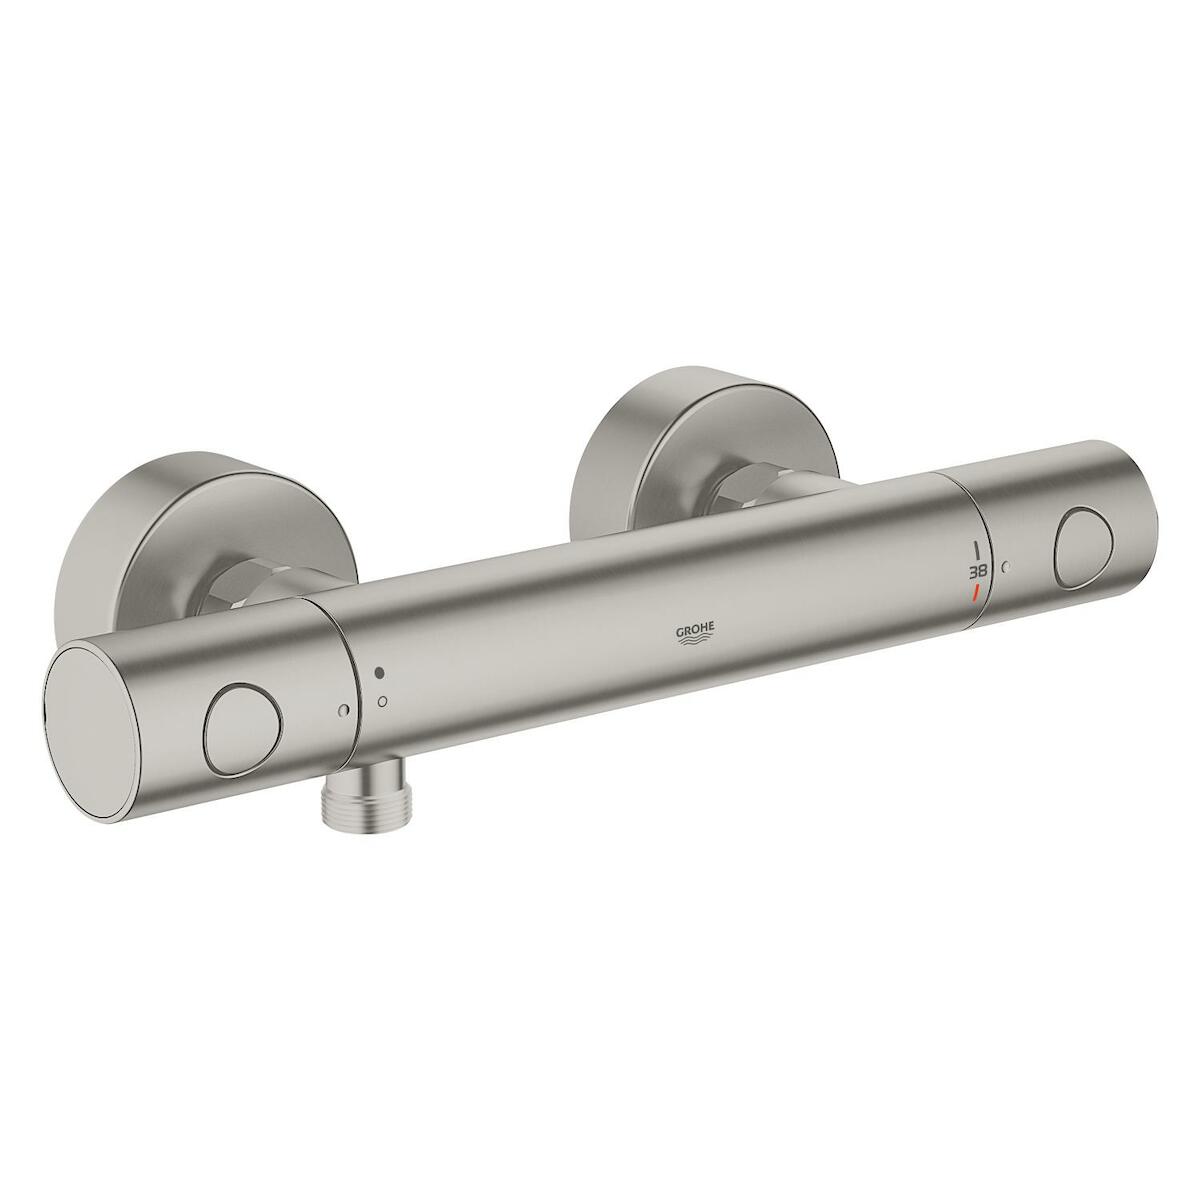 Termostat Grohe Grohtherm 1000 Cosmopolitan s termostatickou baterií 150 mm supersteel 34065DC2 Grohe